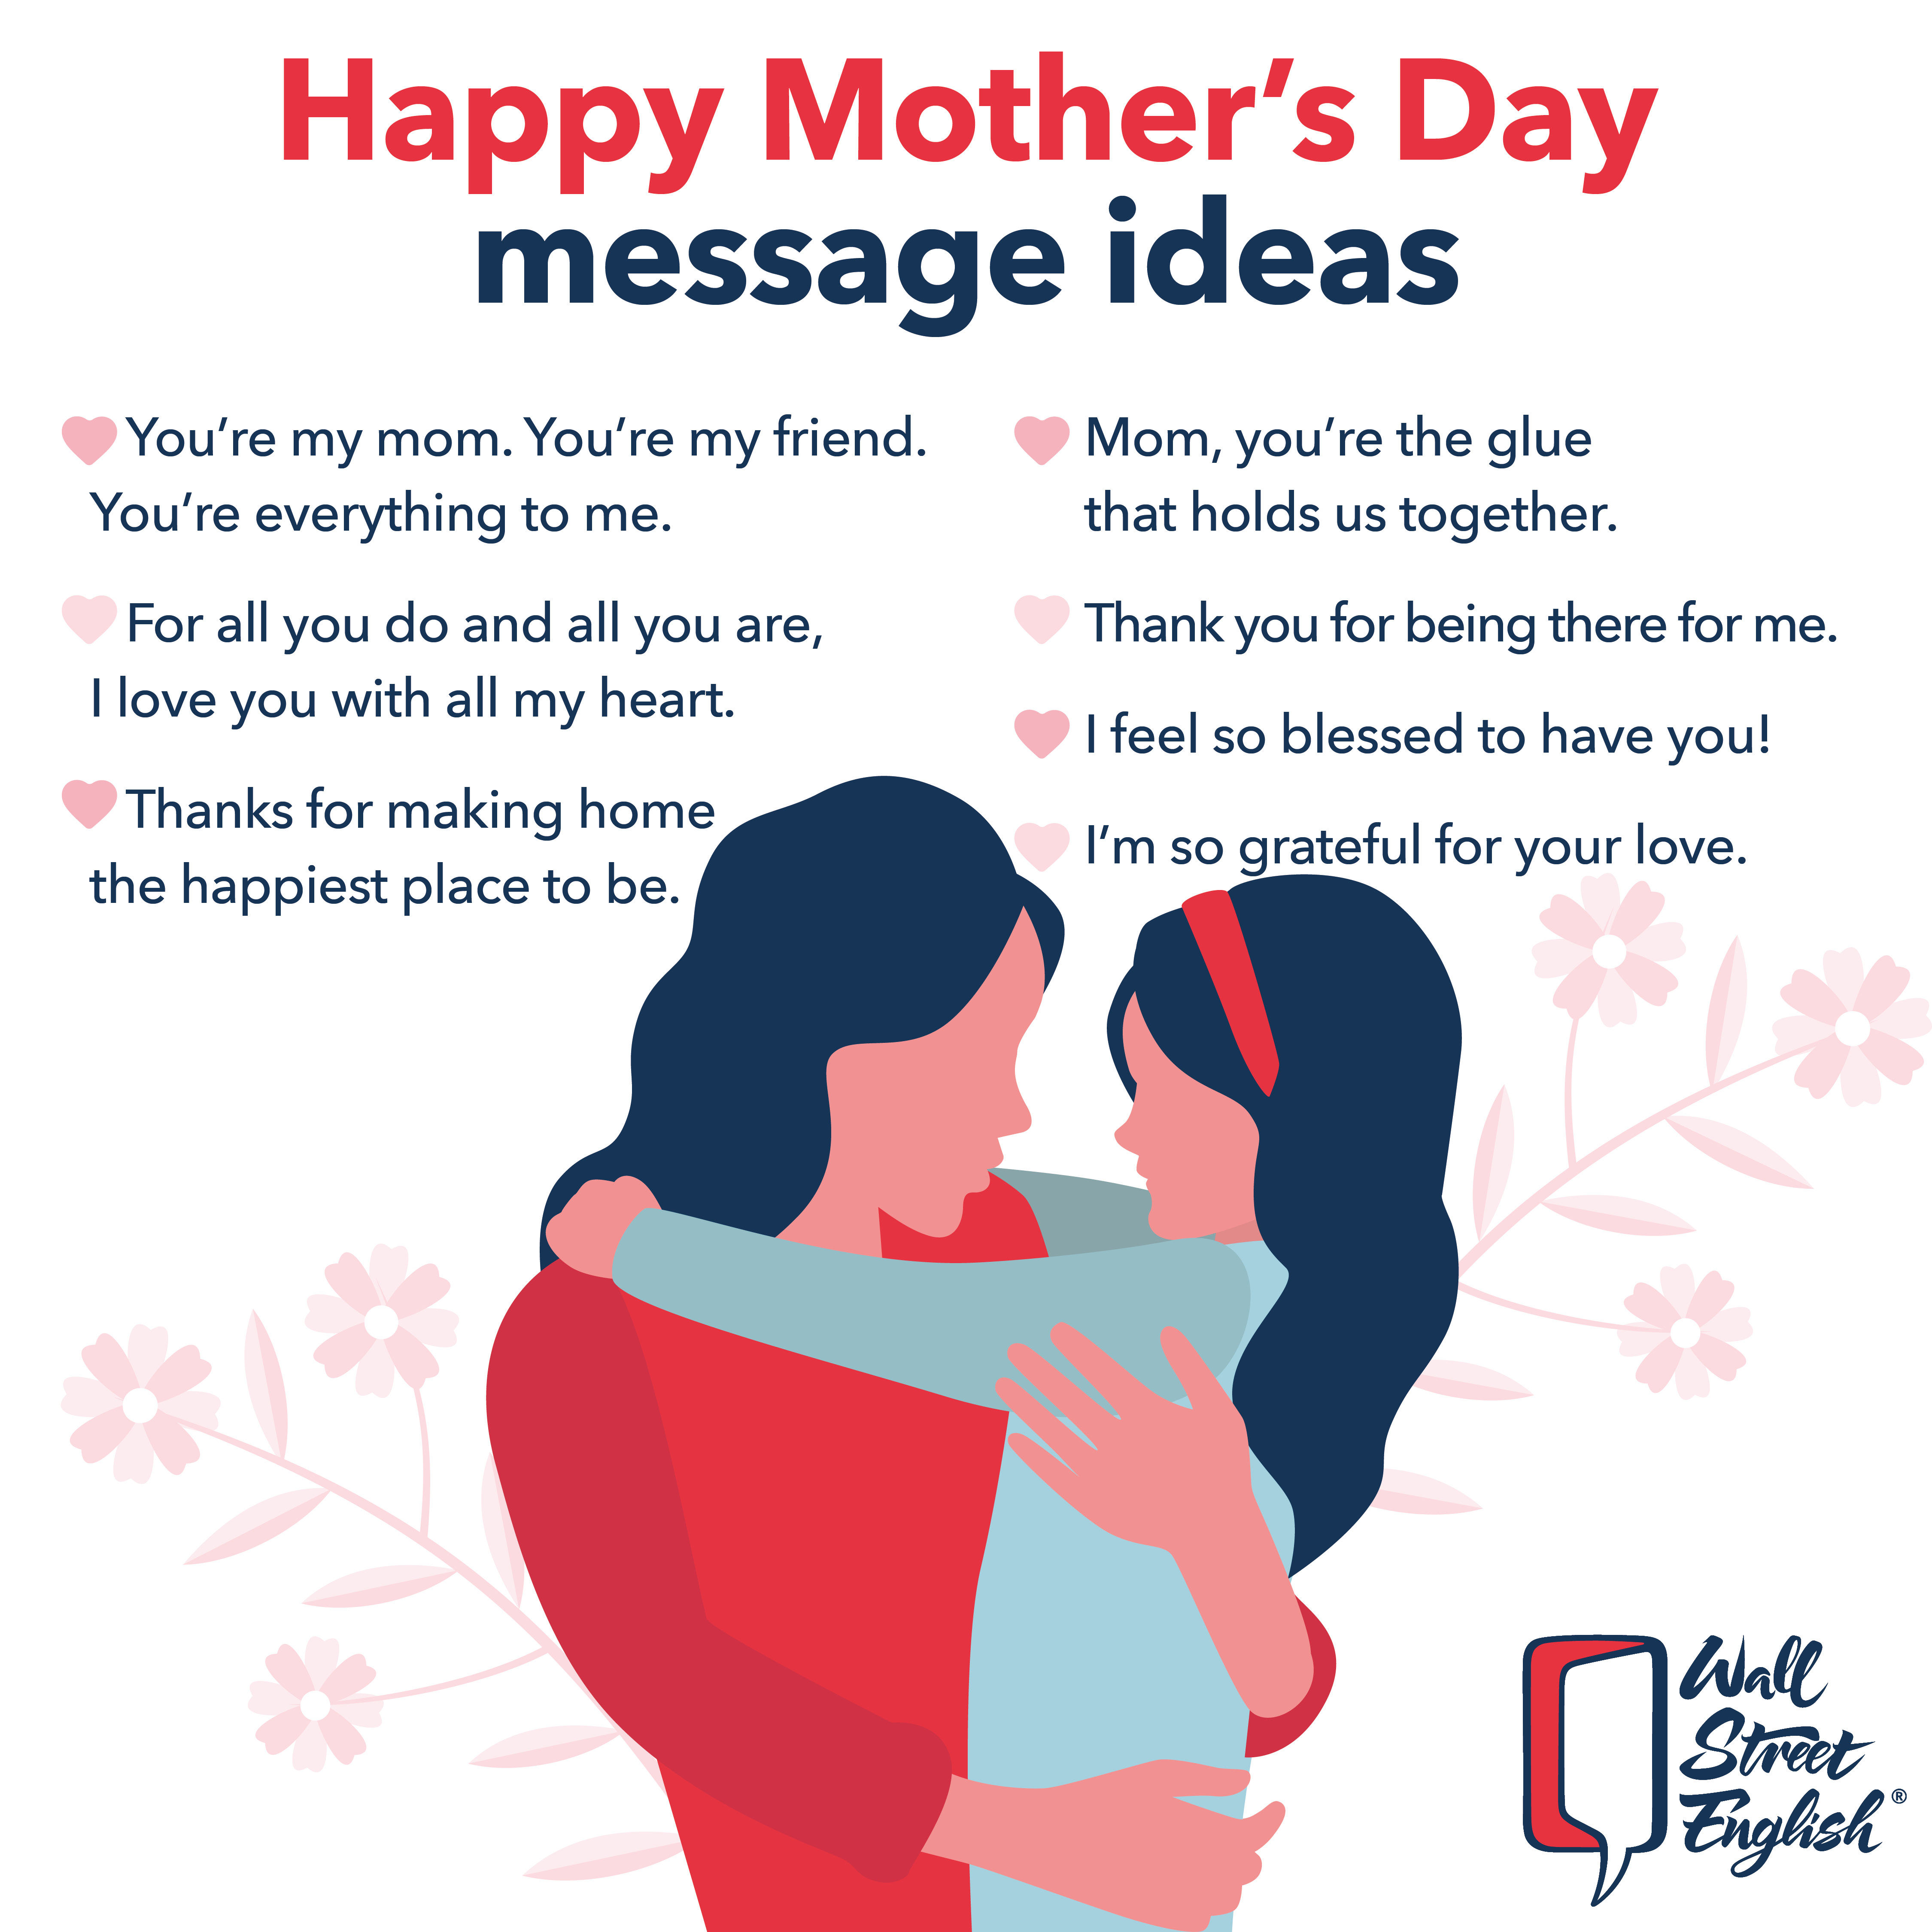 Happy mother's day message ideas